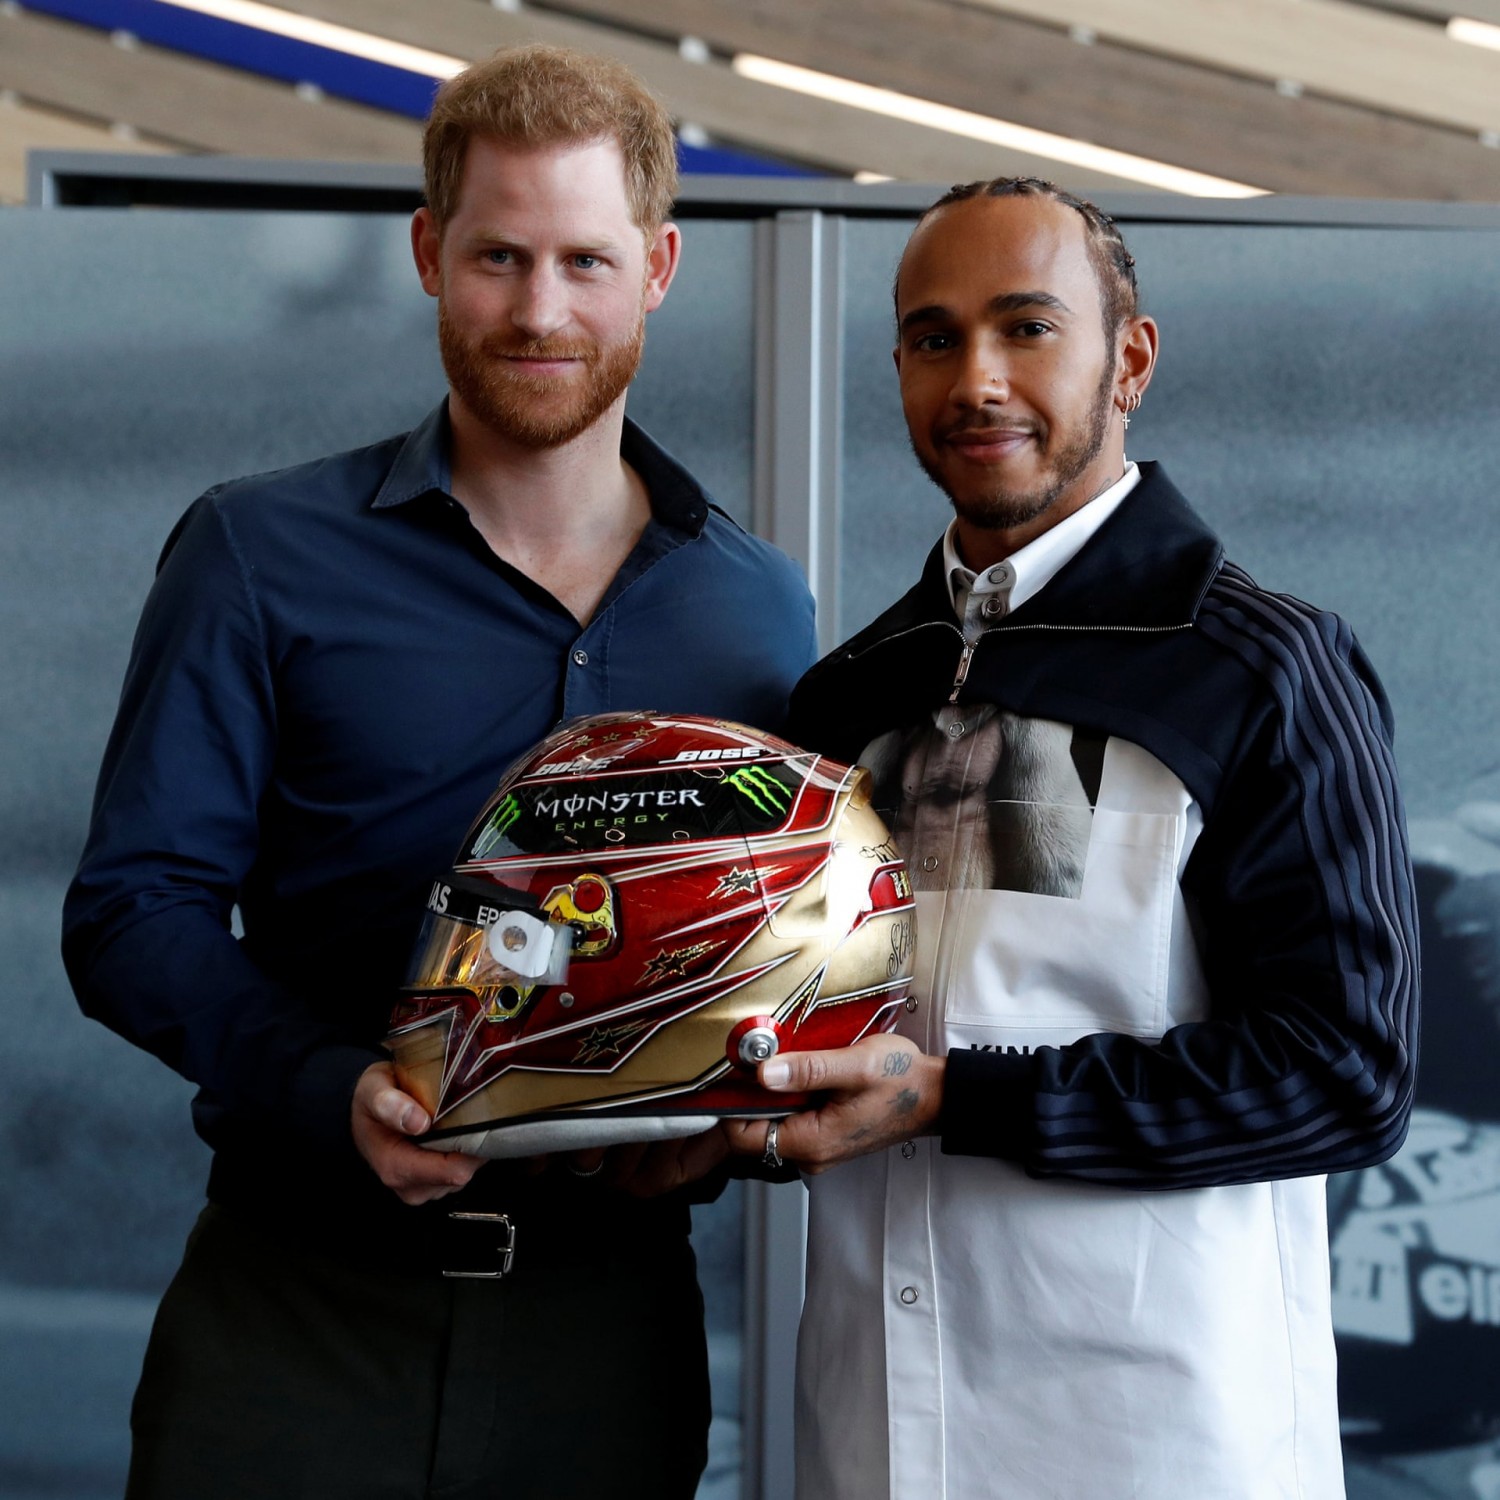  Prince Harry meets Lewis Hamilton at Silverstone on Friday. Photograph: WPA Pool/Getty Images